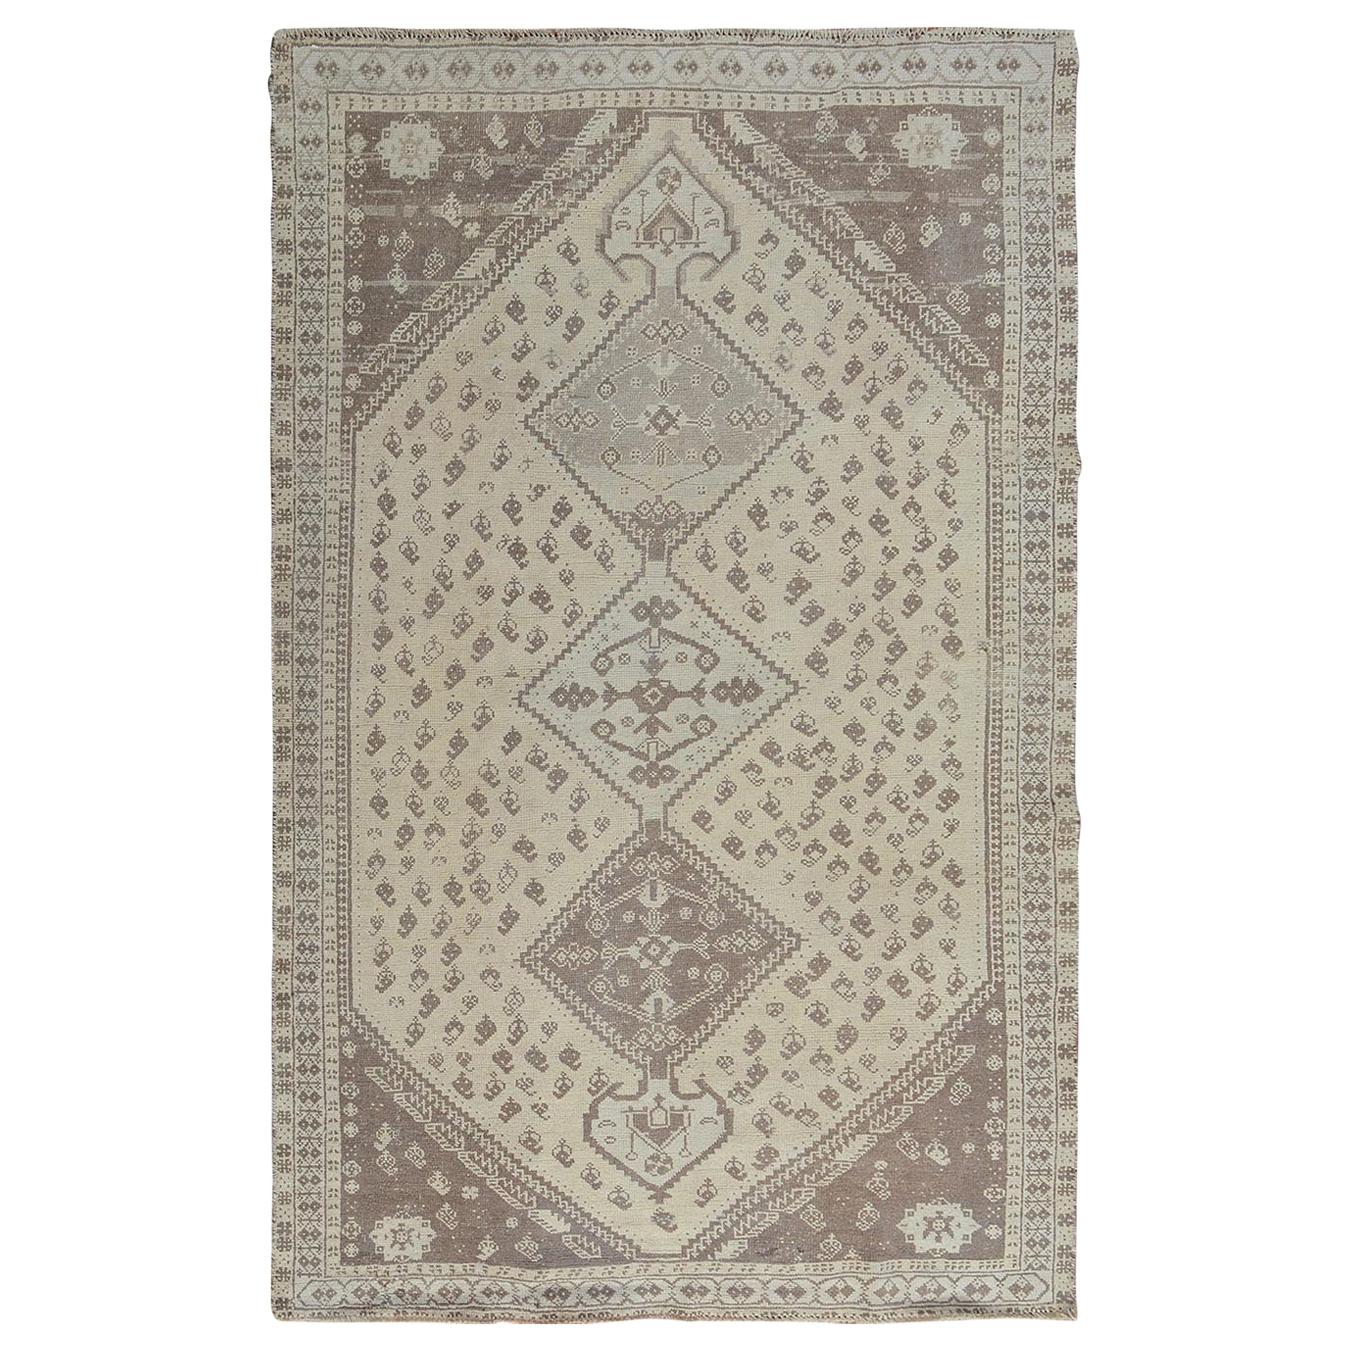 Natural Colors Vintage and Worn Down Persian Shiraz Pure Wool Hand Knotted Rug For Sale